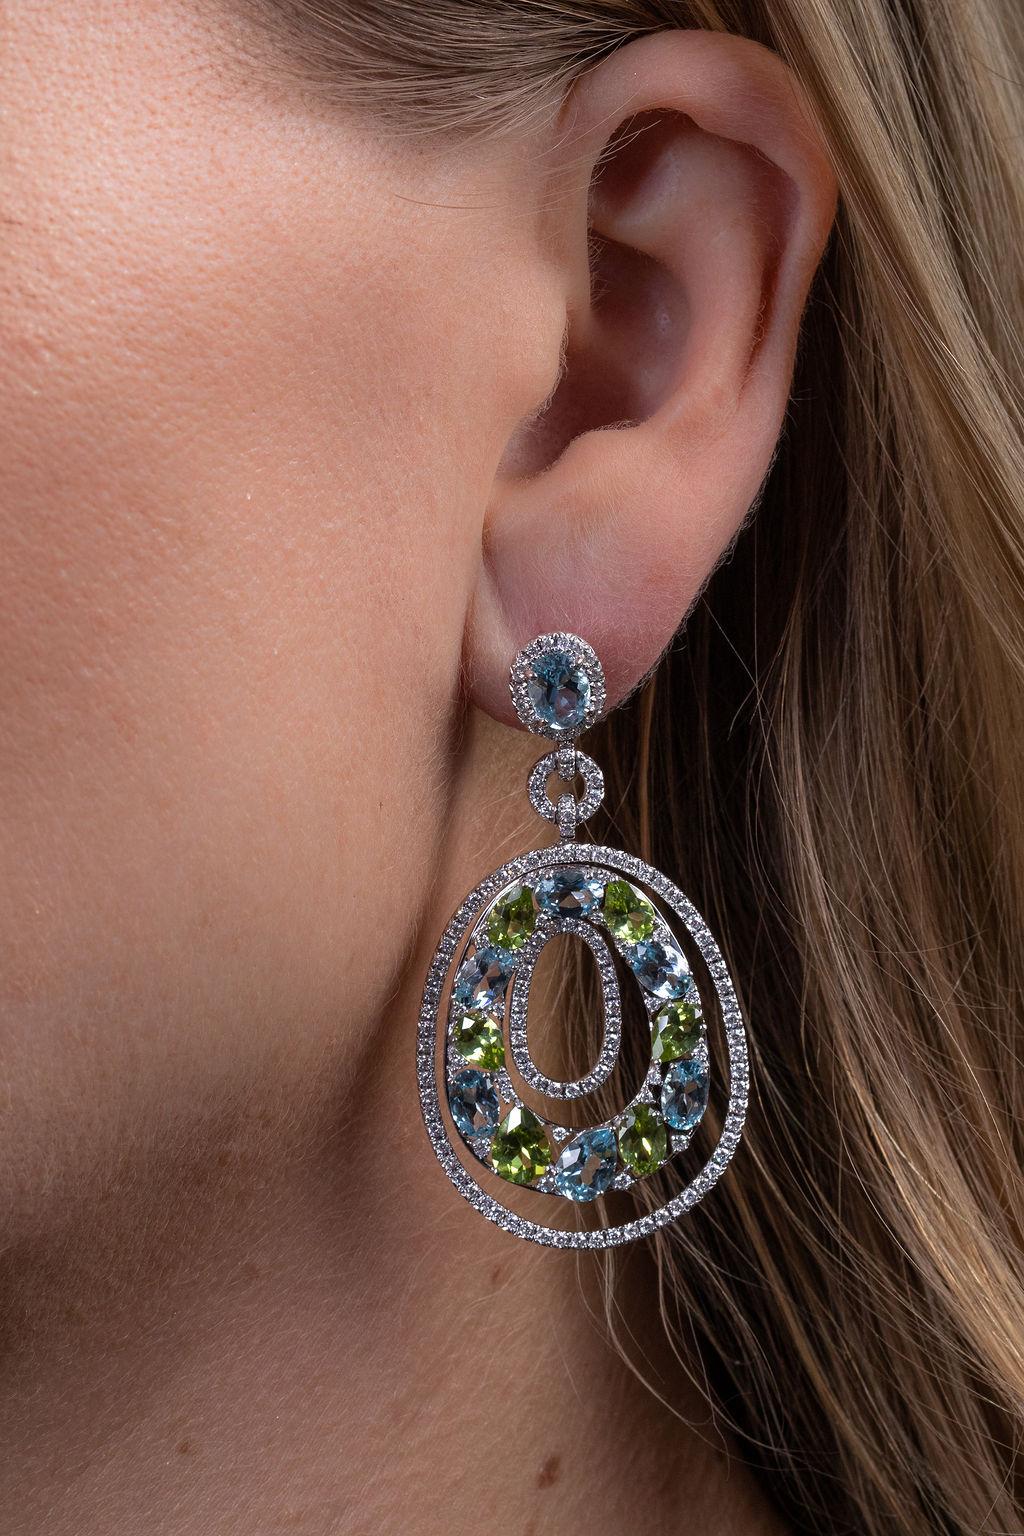 Blue topaz and peridot complemented by white diamonds create a beautiful, fresh look reminiscent of the natural beauty of the ocean and forest.  Just over two inches in length.  Created in 18k white gold.